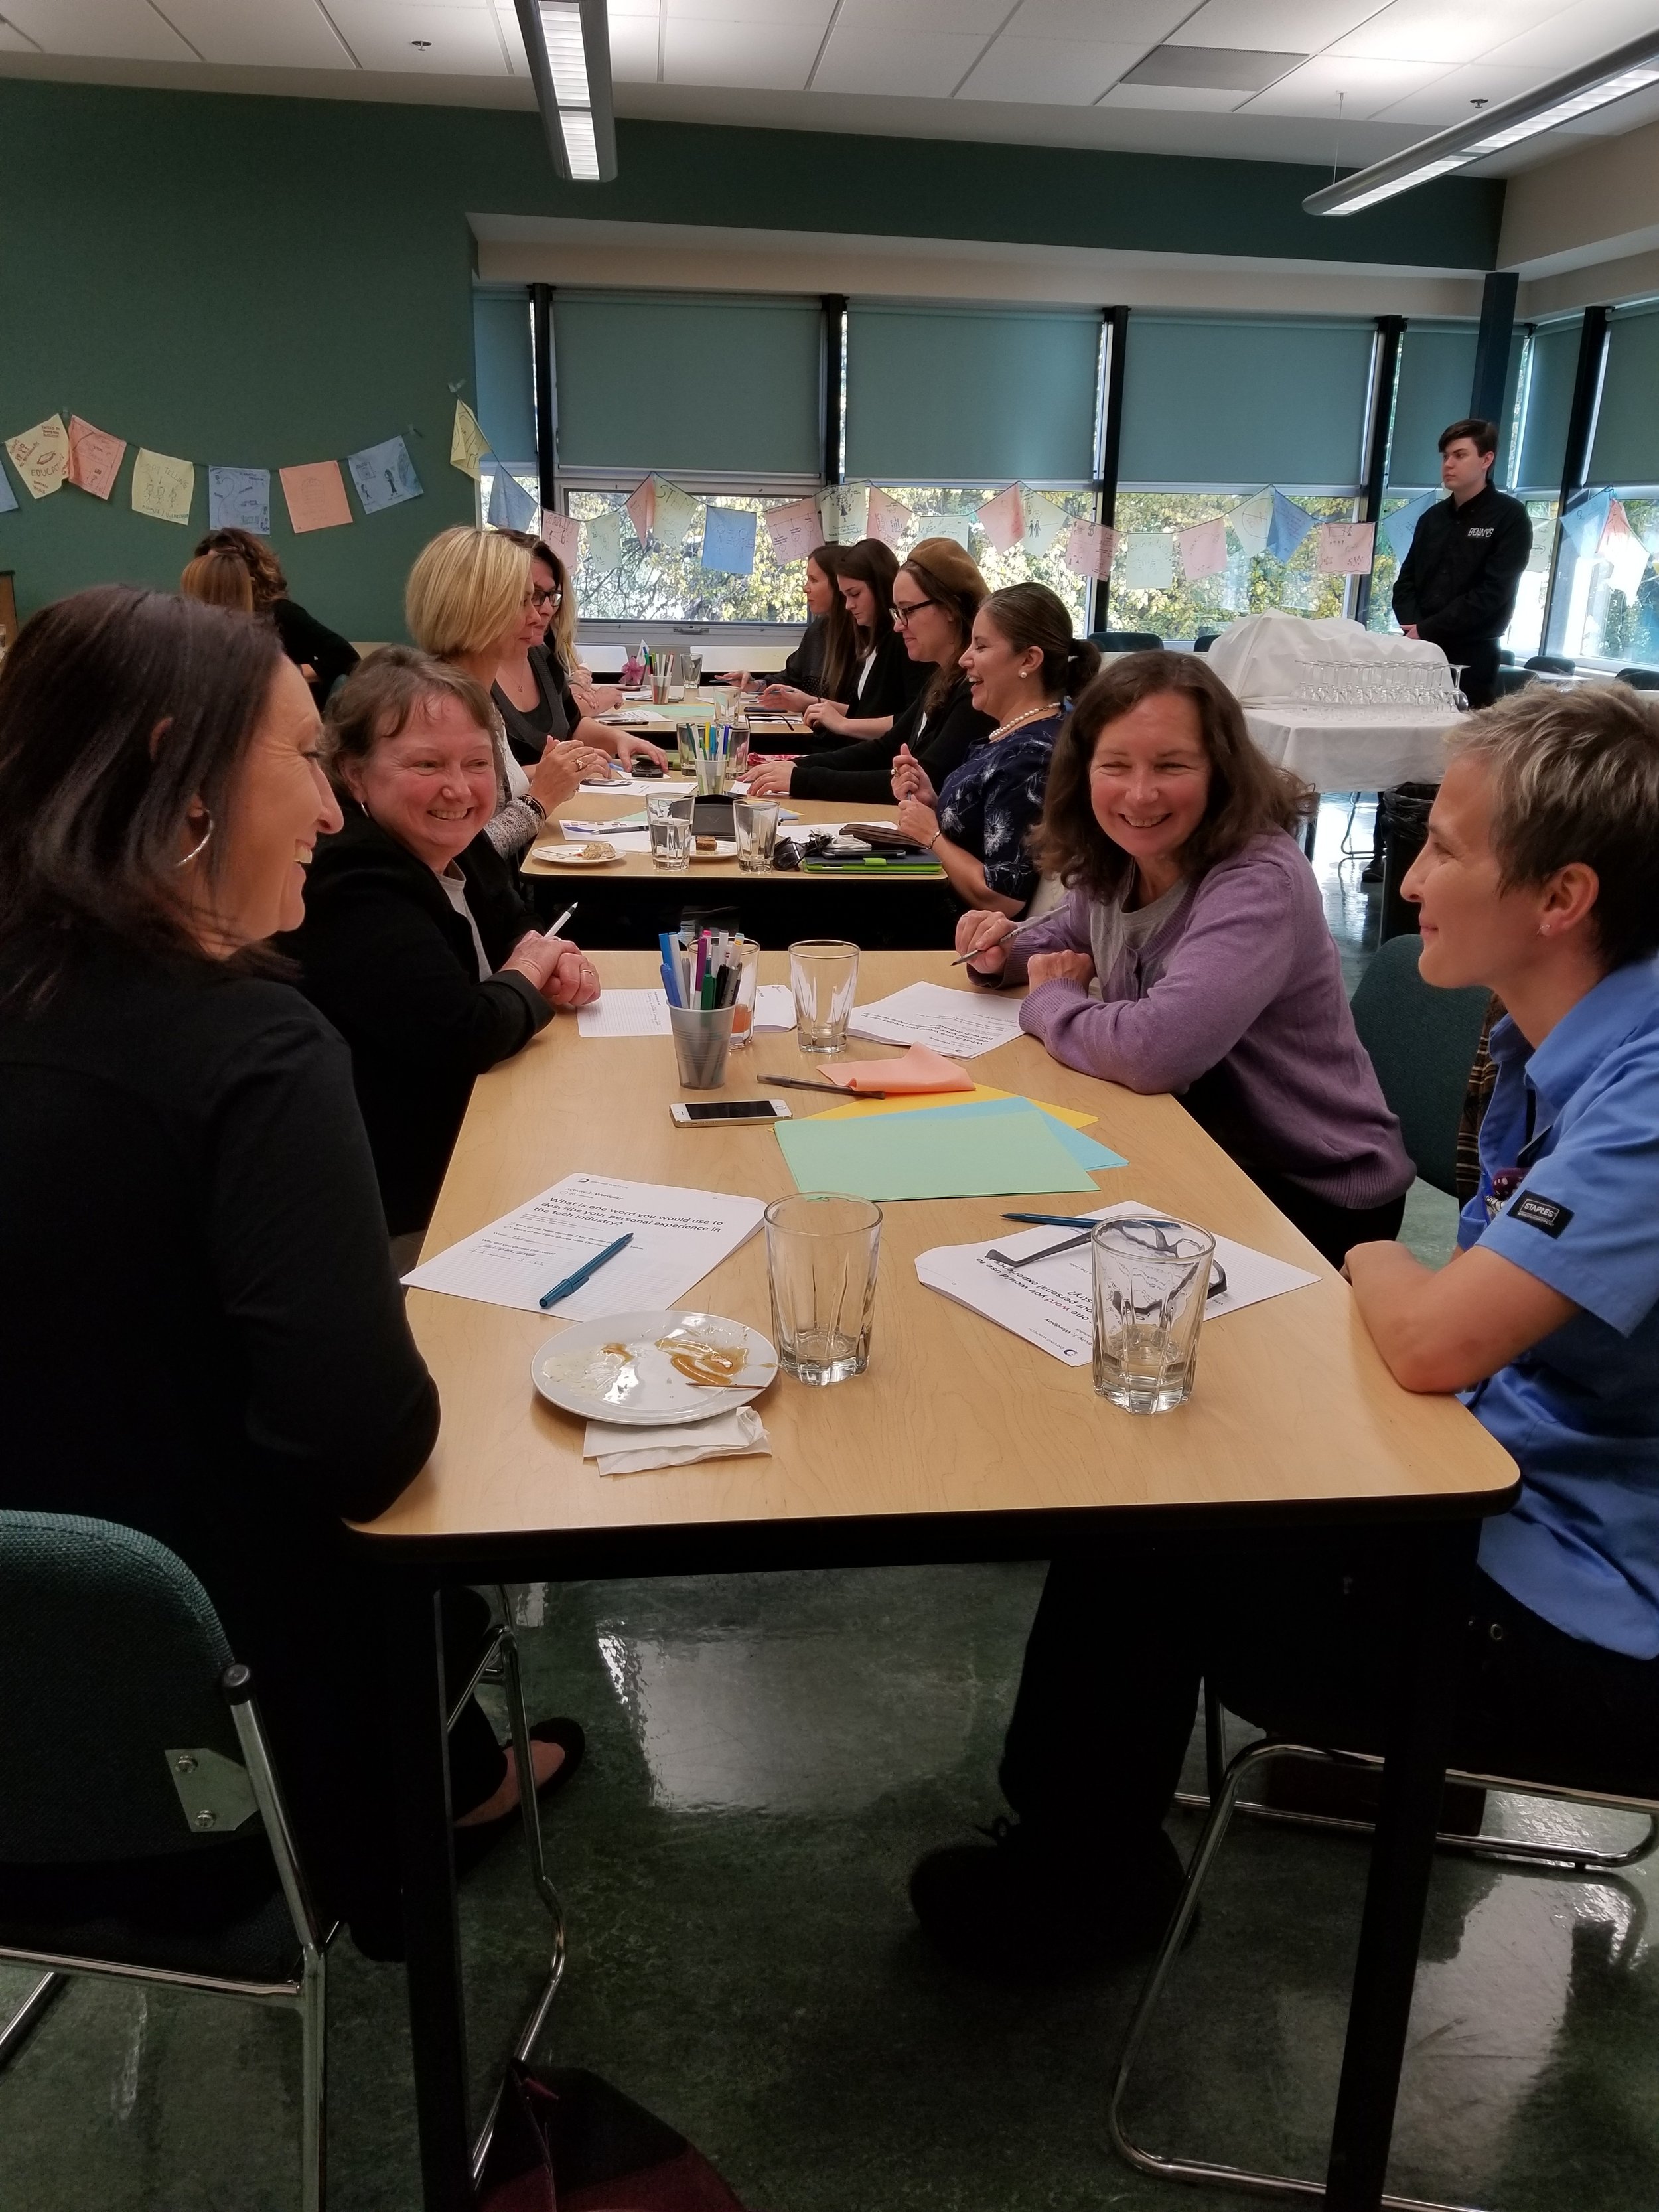  Image is of people gathered at a table for the Community Conversation in Brandon. They have paper and pens on the table along with plates of food and glasses of water. The women at the table seem to be smiling and having a conversation with one anot